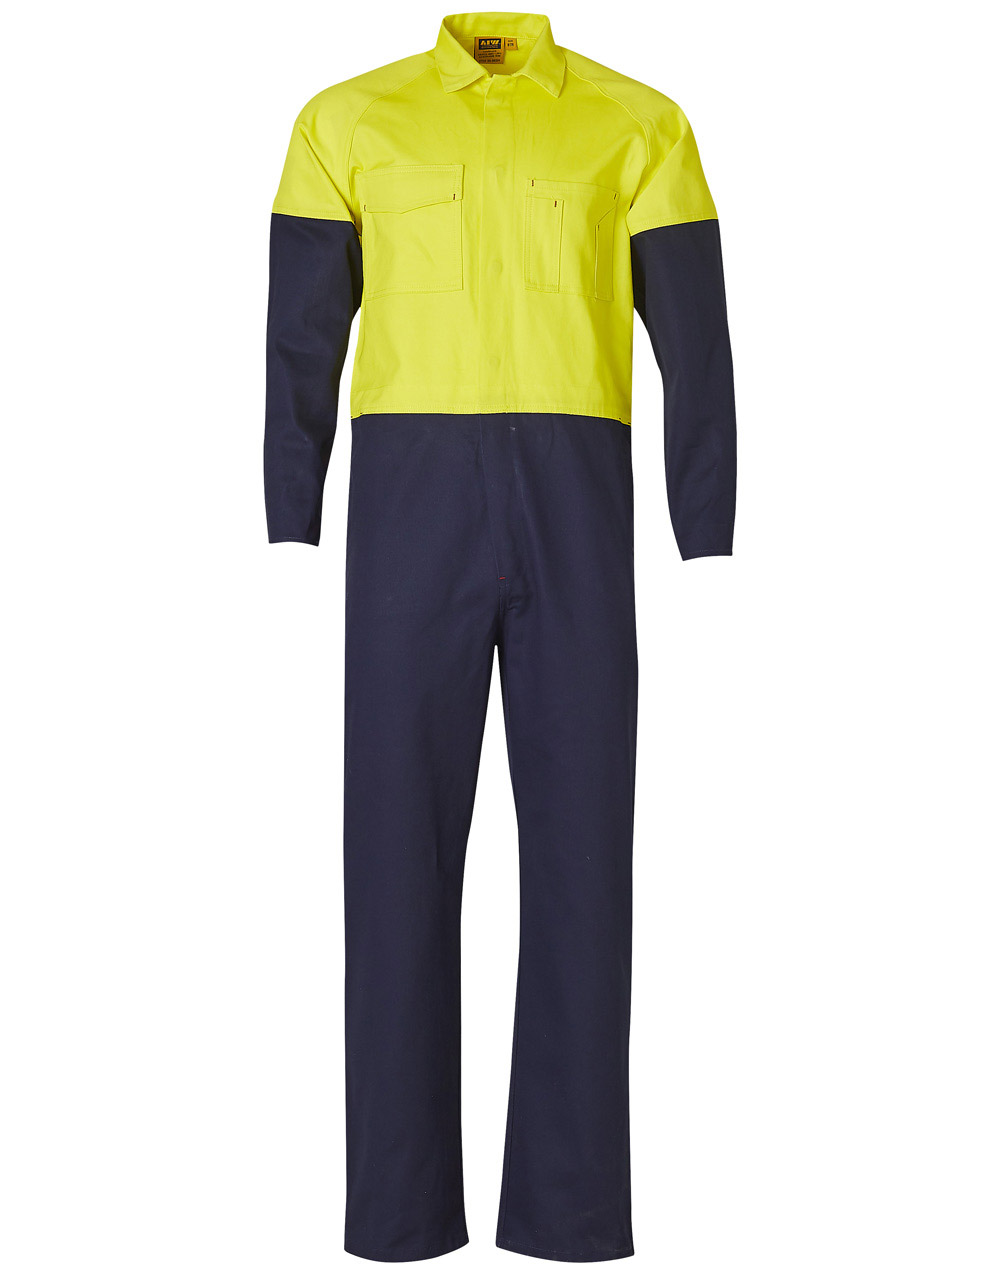 SW204/SW205 MEN’S TWO TONE COVERALL Regular Size